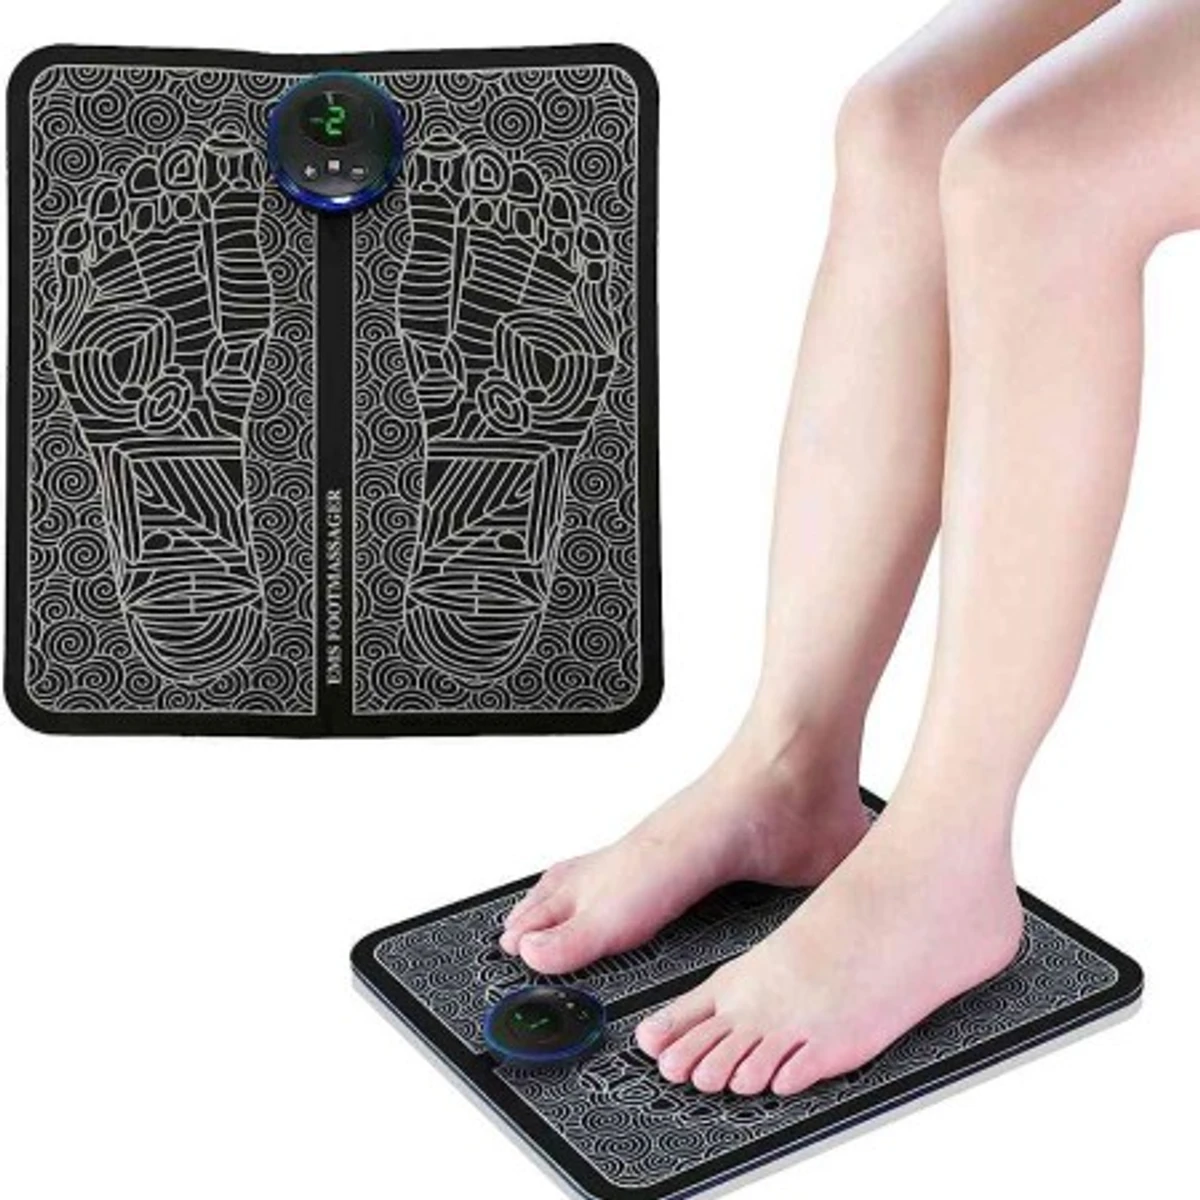 EMS Foot Massager Therapy